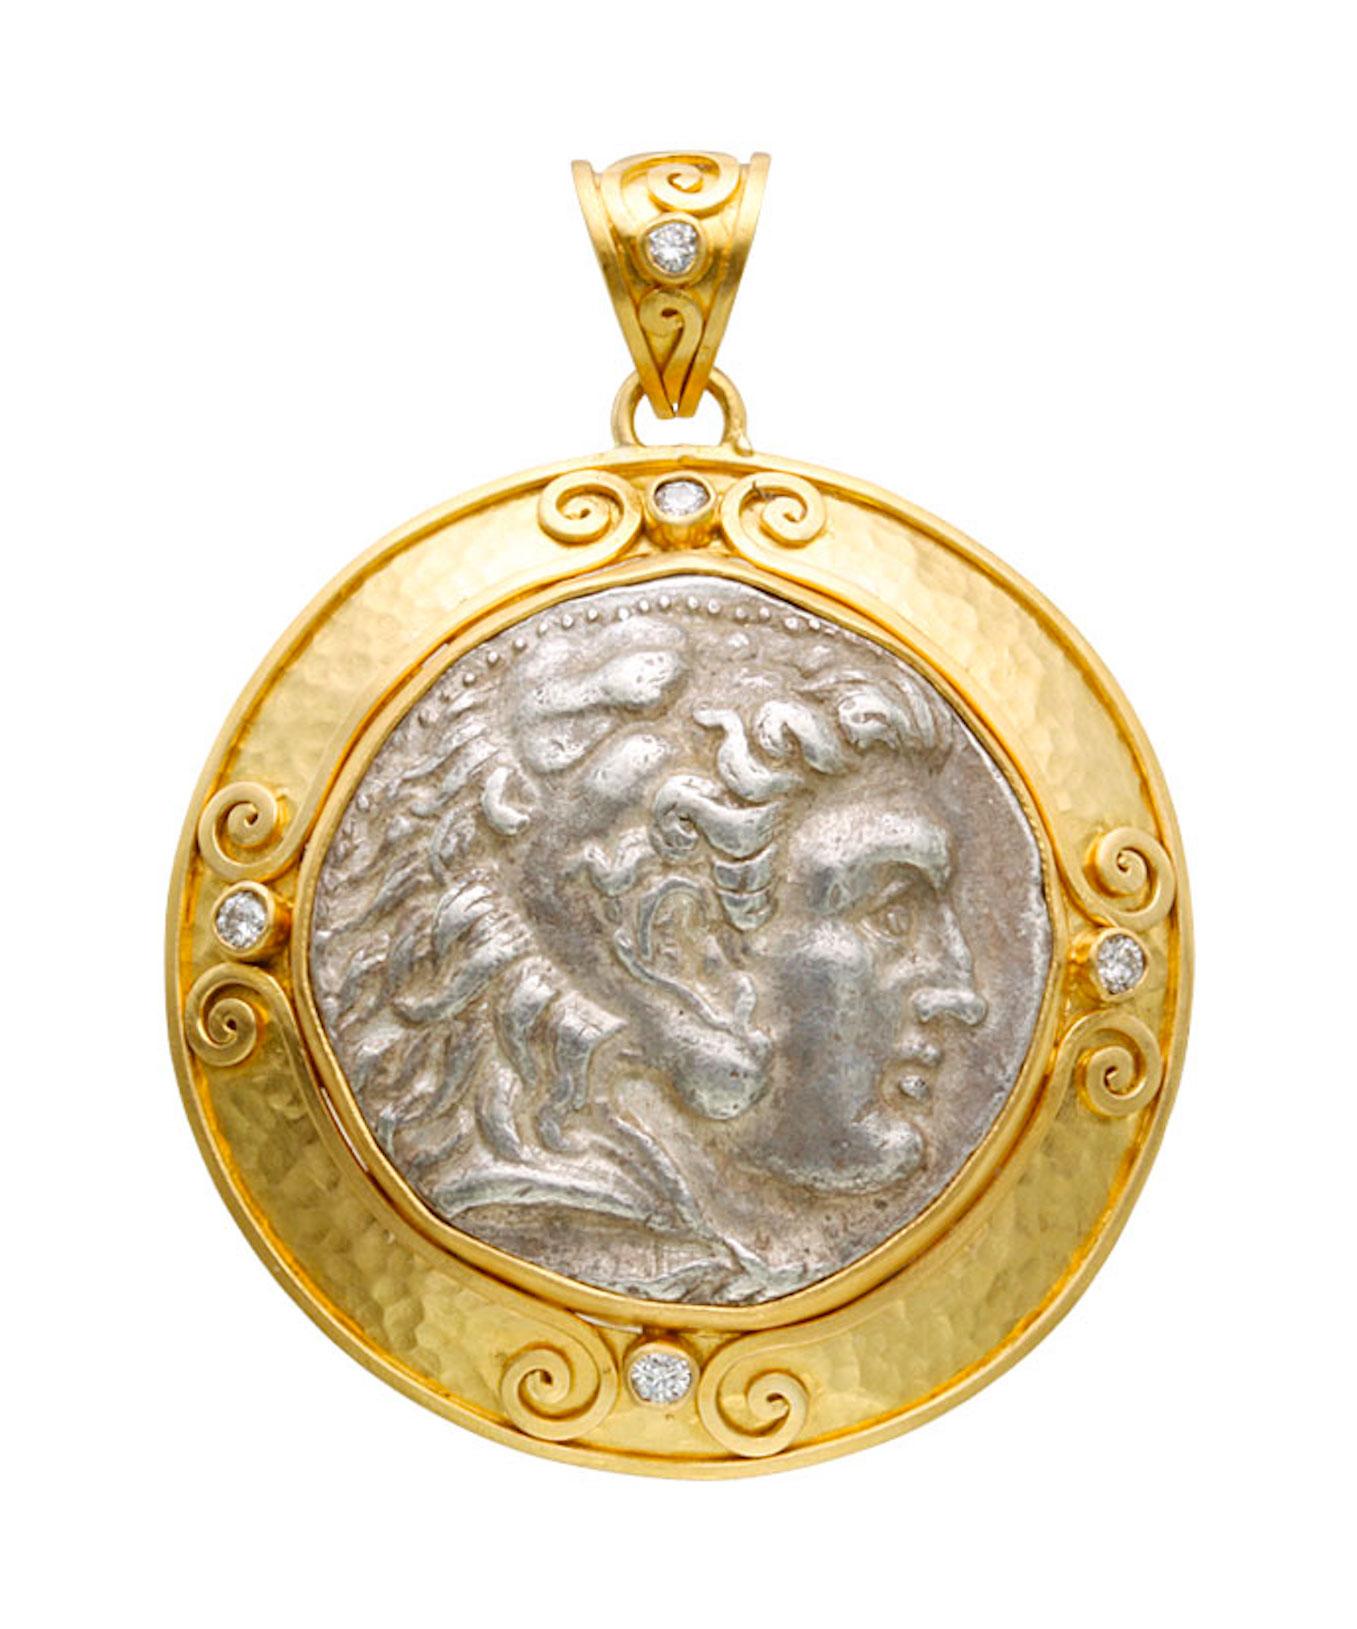 A TOP grade, authentic, ancient Greek silver 